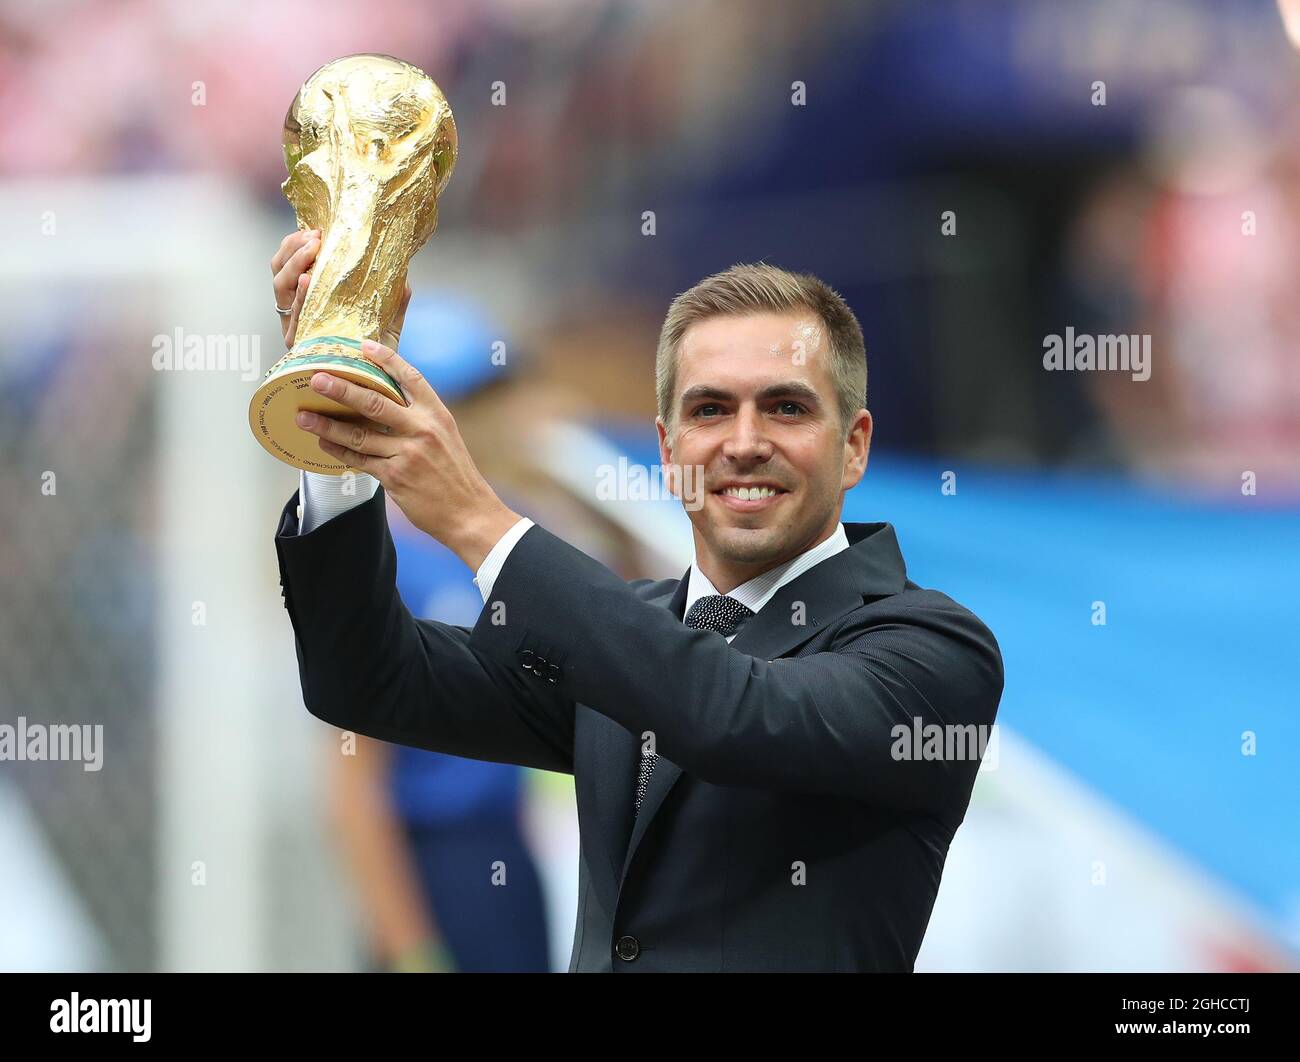 Former Germany star Philipp Lahm presents the World Cup to the crowd during the FIFA World Cup 2018 Final at the Luzhniki Stadium, Moscow. Picture date 15th July 2018. Picture credit should read: David Klein/Sportimage via PA Images Stock Photo